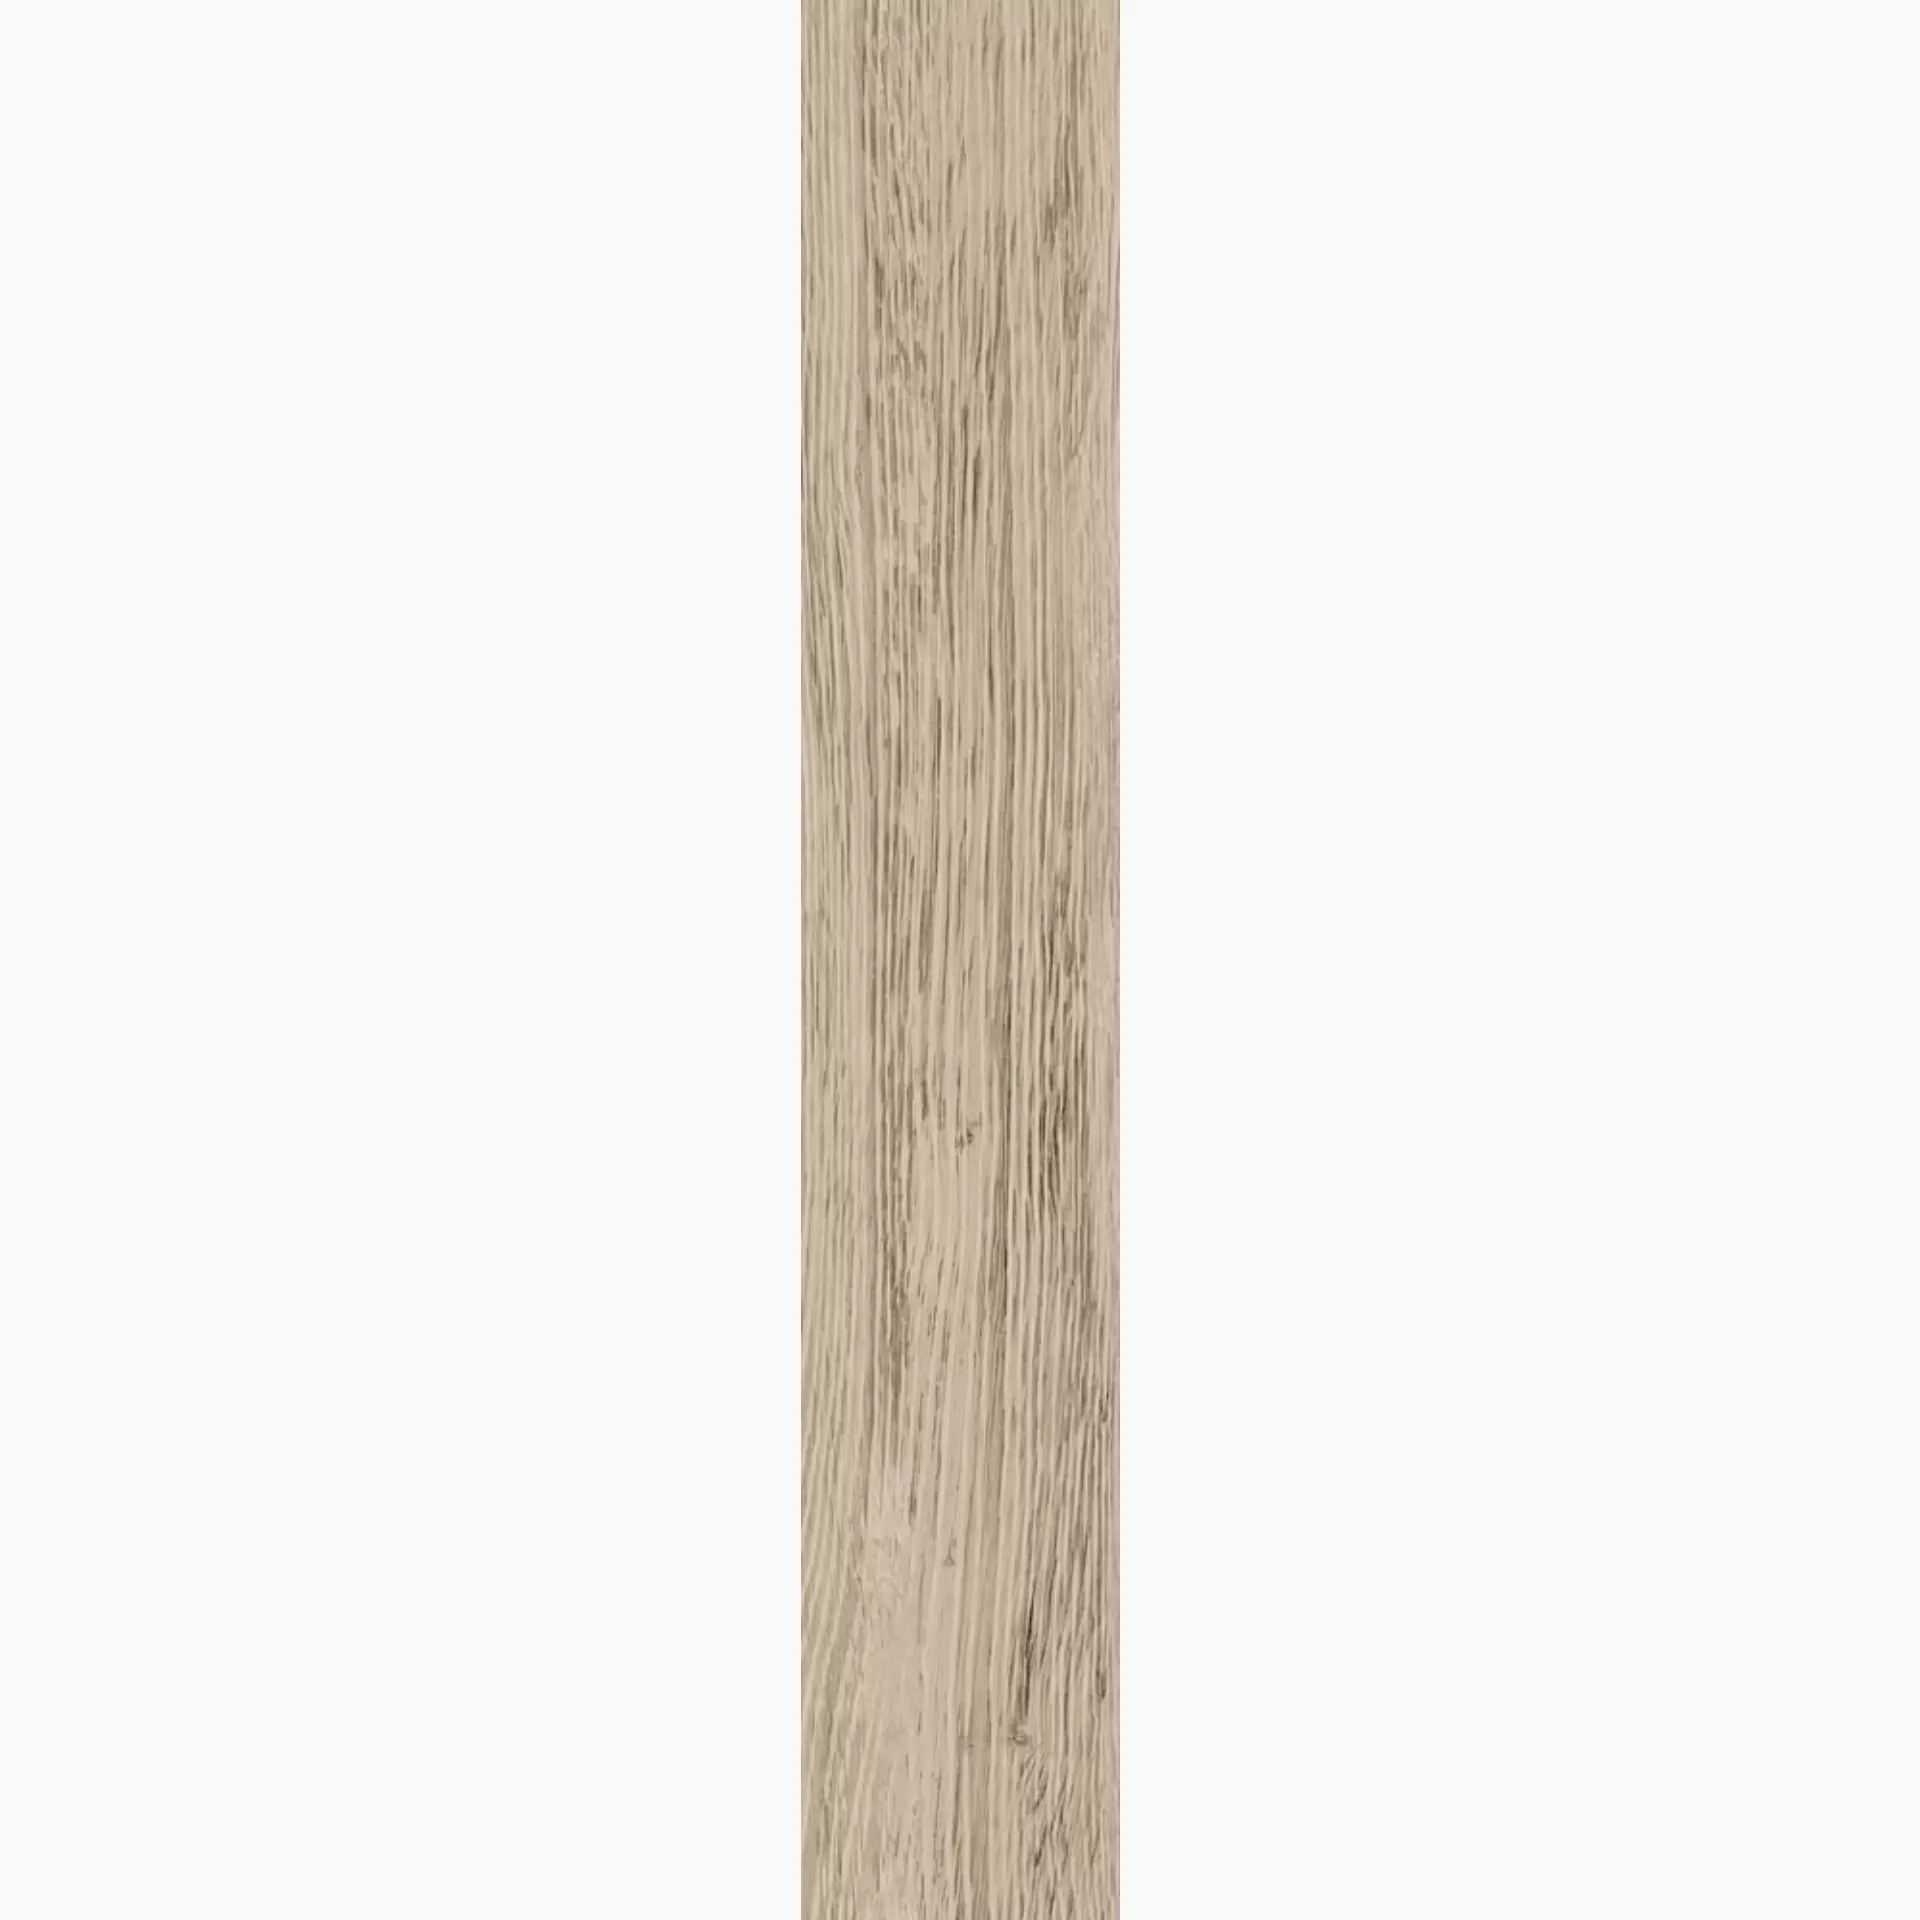 Sant Agostino Sunwood Almond Natural CSASNA1060 10x60cm rectified 9mm